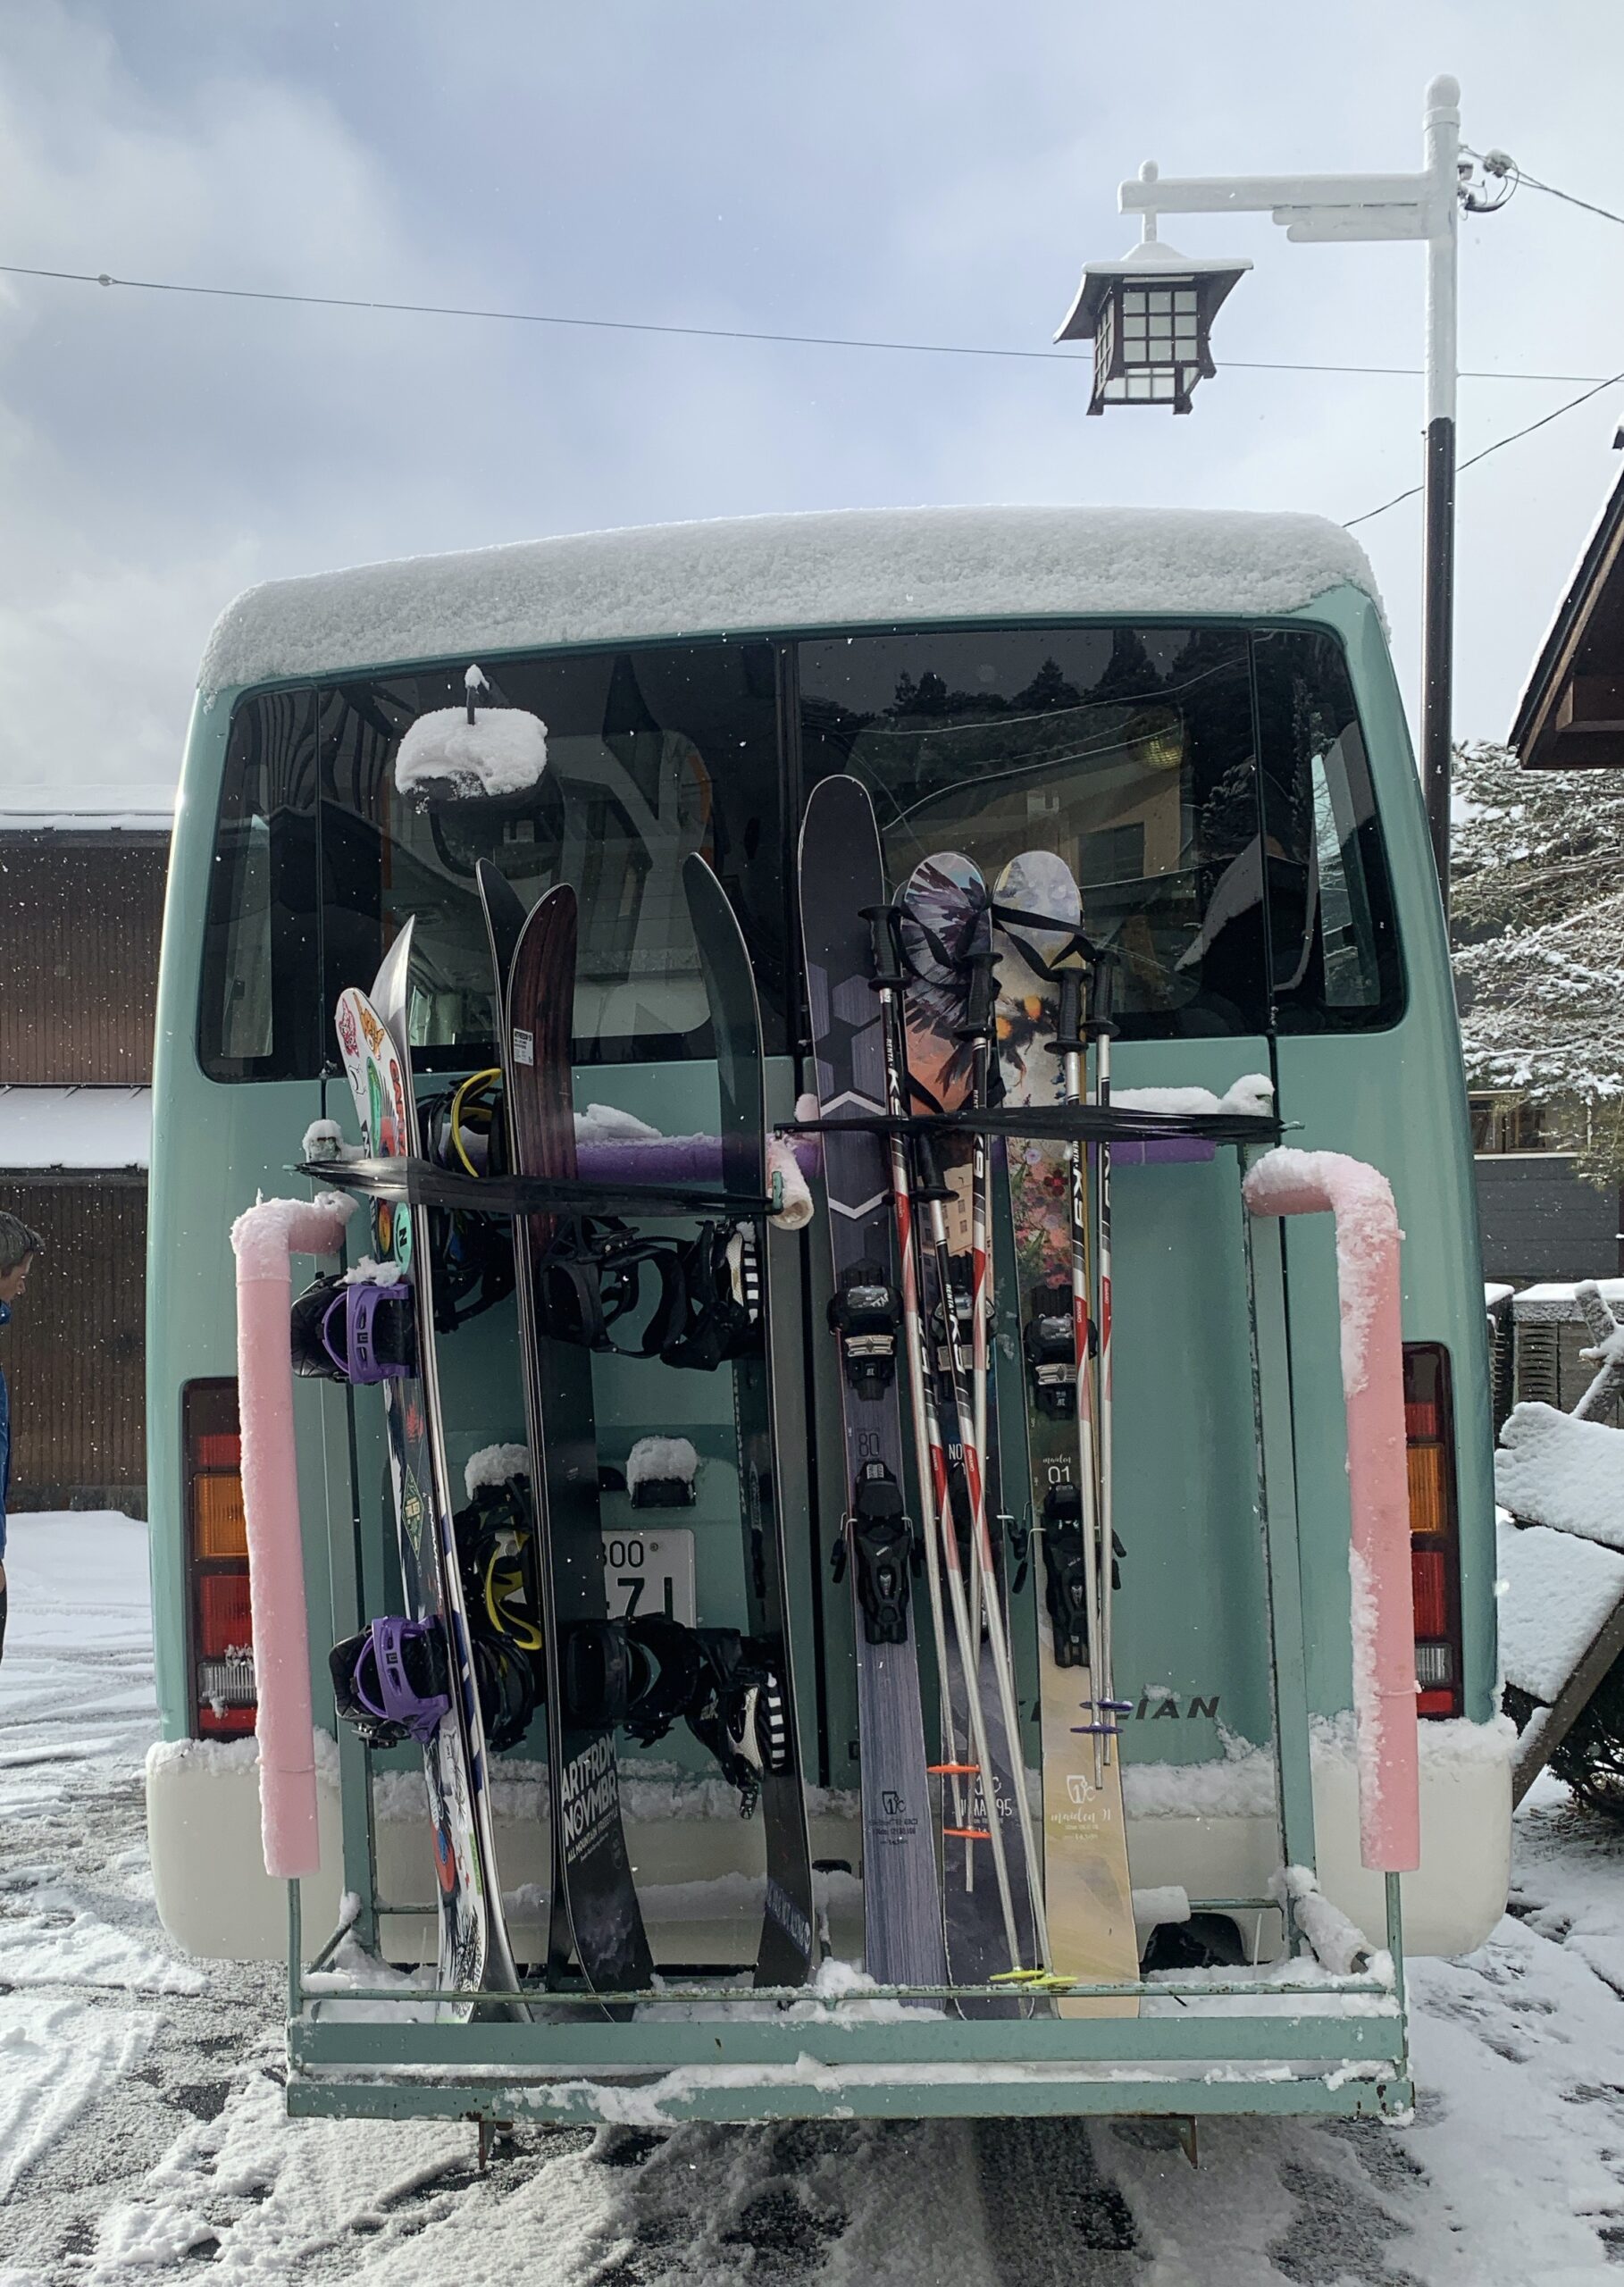 Skis and Snowboards on a bus